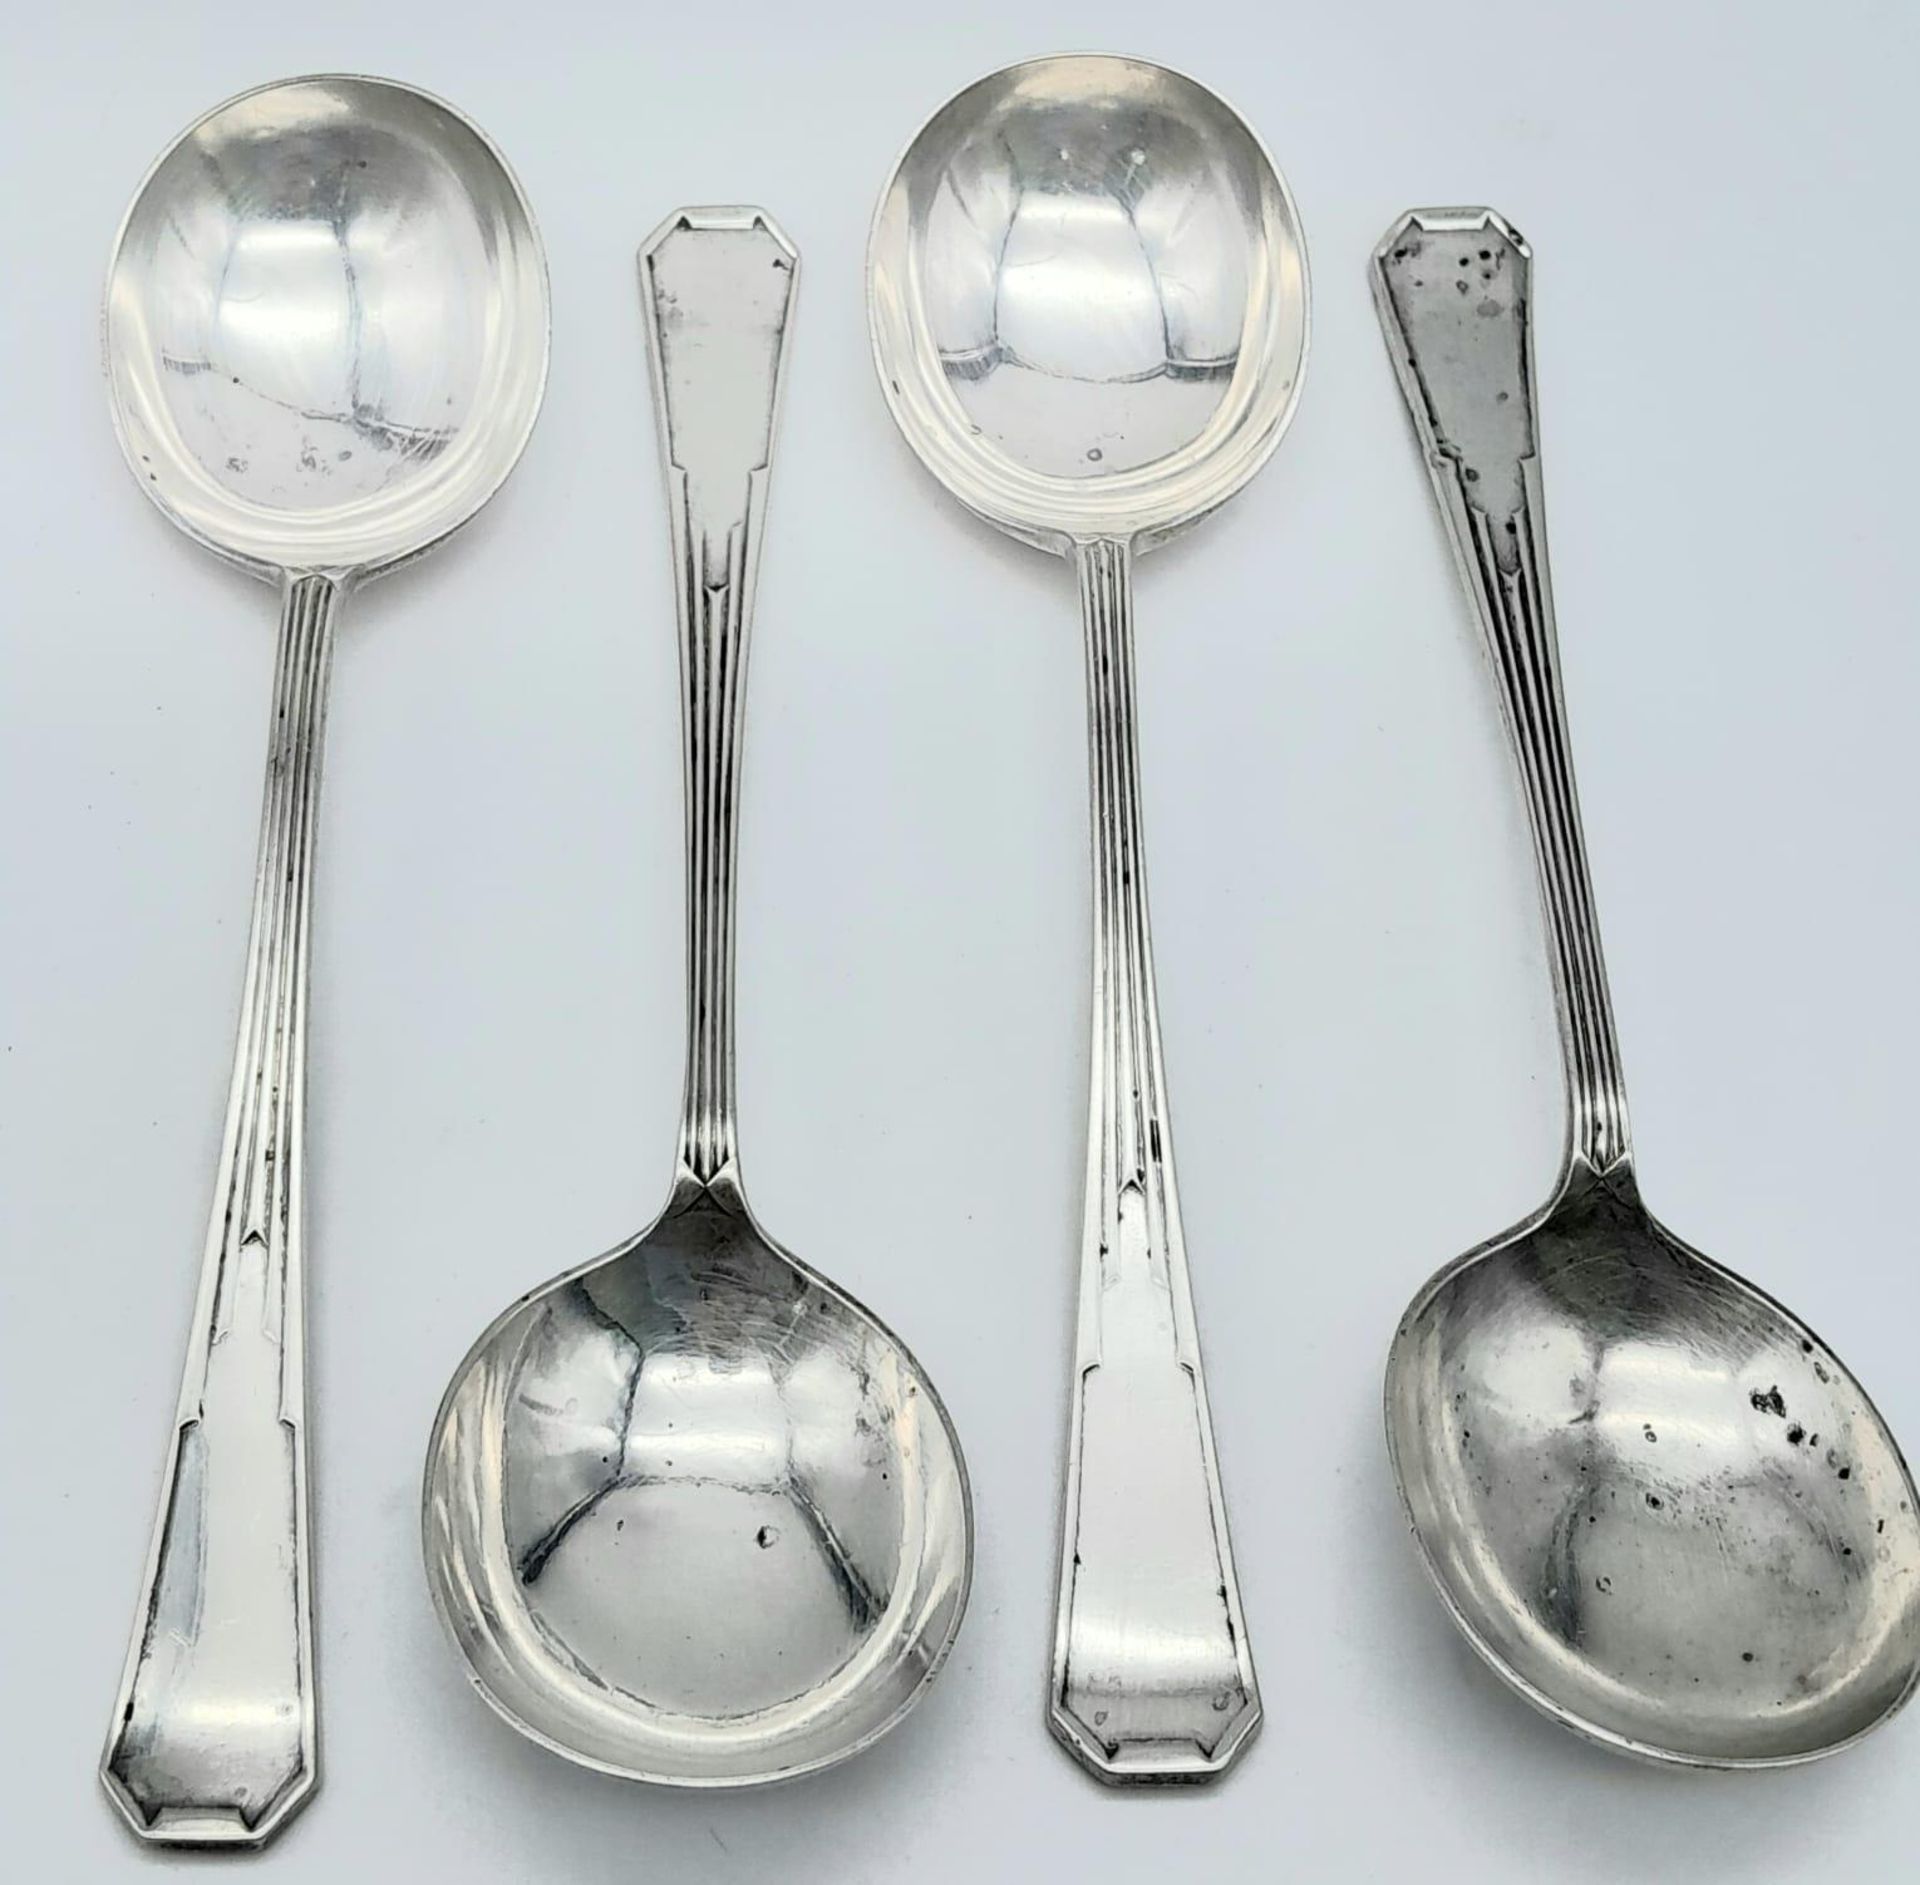 Four 1937 Sheffield Sterling Silver Serving Spoons. Full UK hallmarks. 327g total weight. 20cm - Image 2 of 4